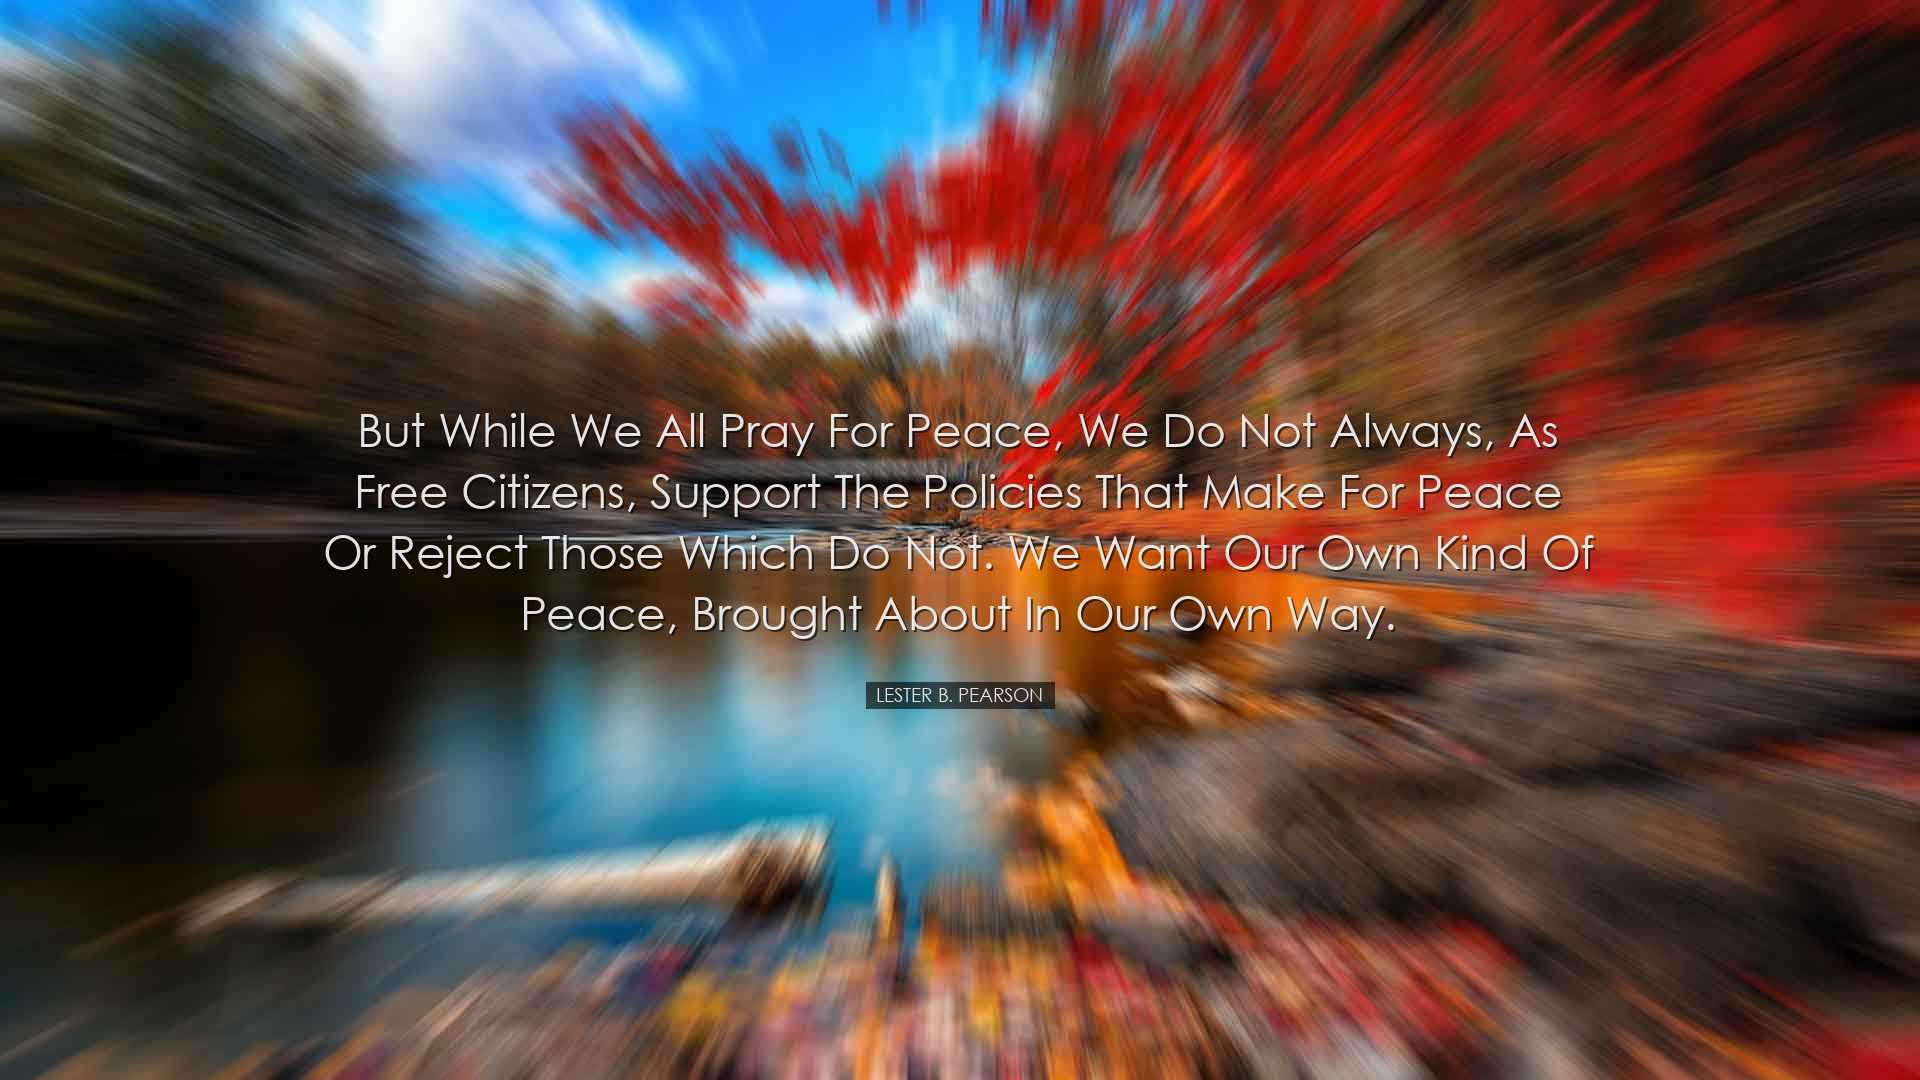 But while we all pray for peace, we do not always, as free citizen